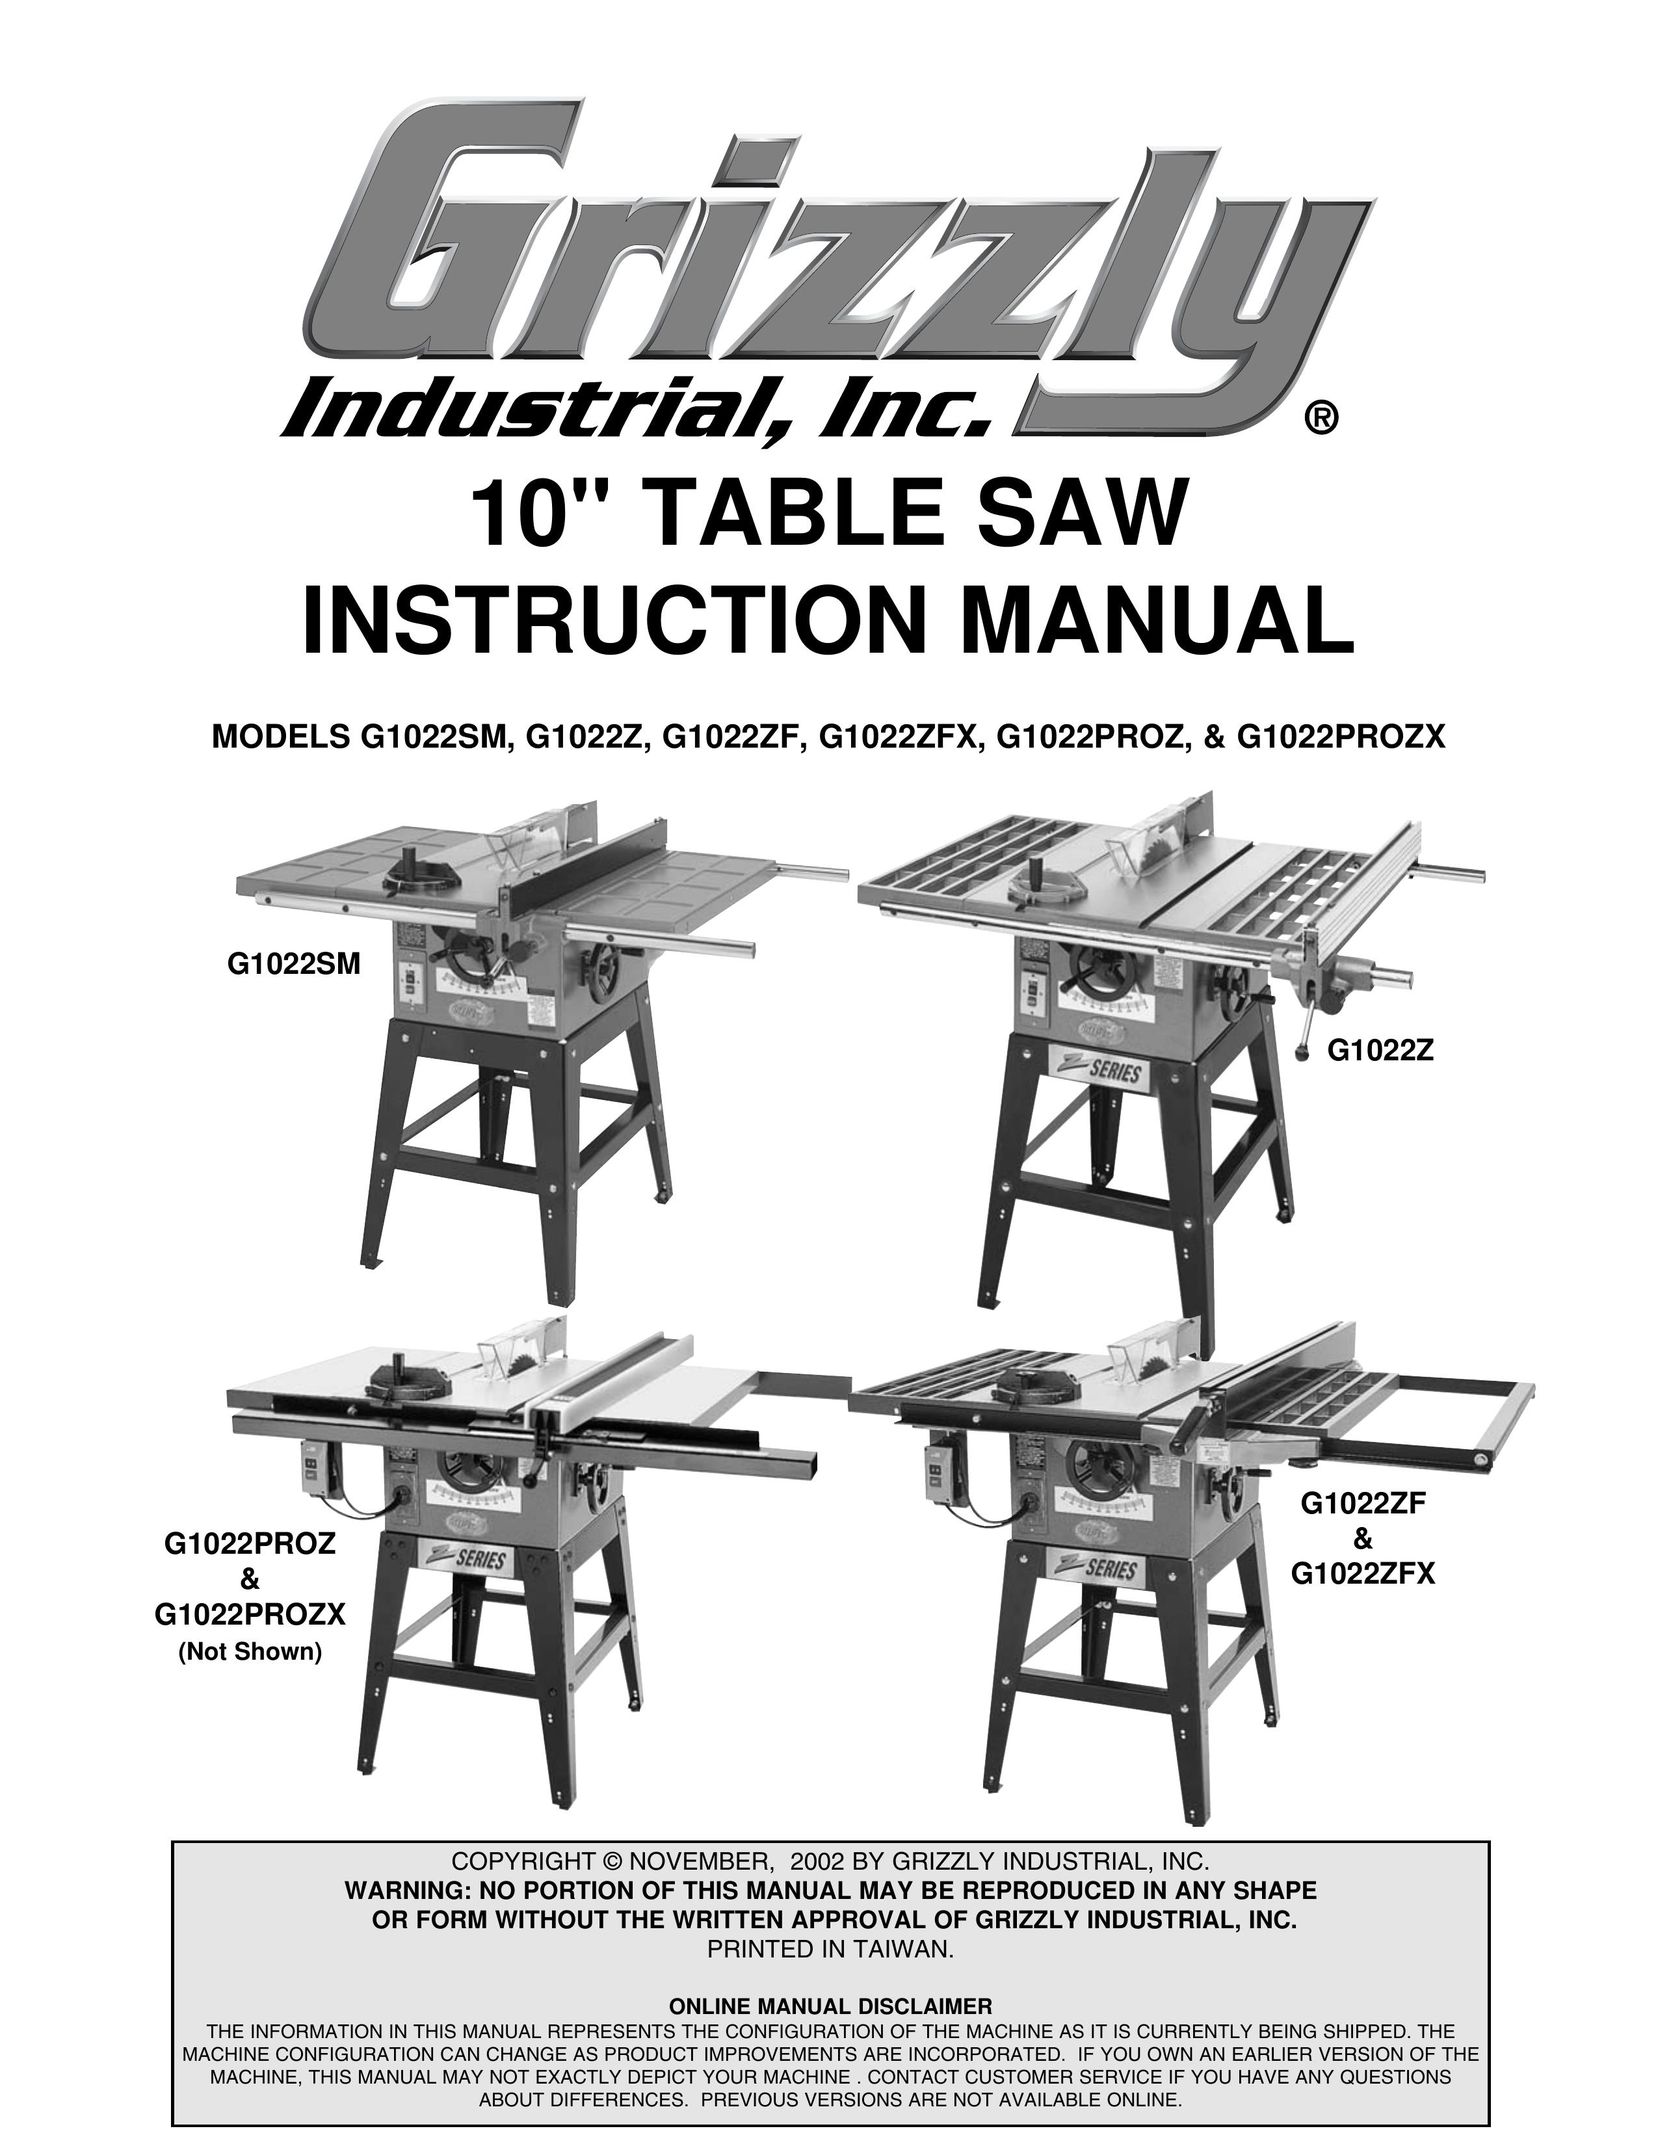 Grizzly & G1022PROZX Saw User Manual